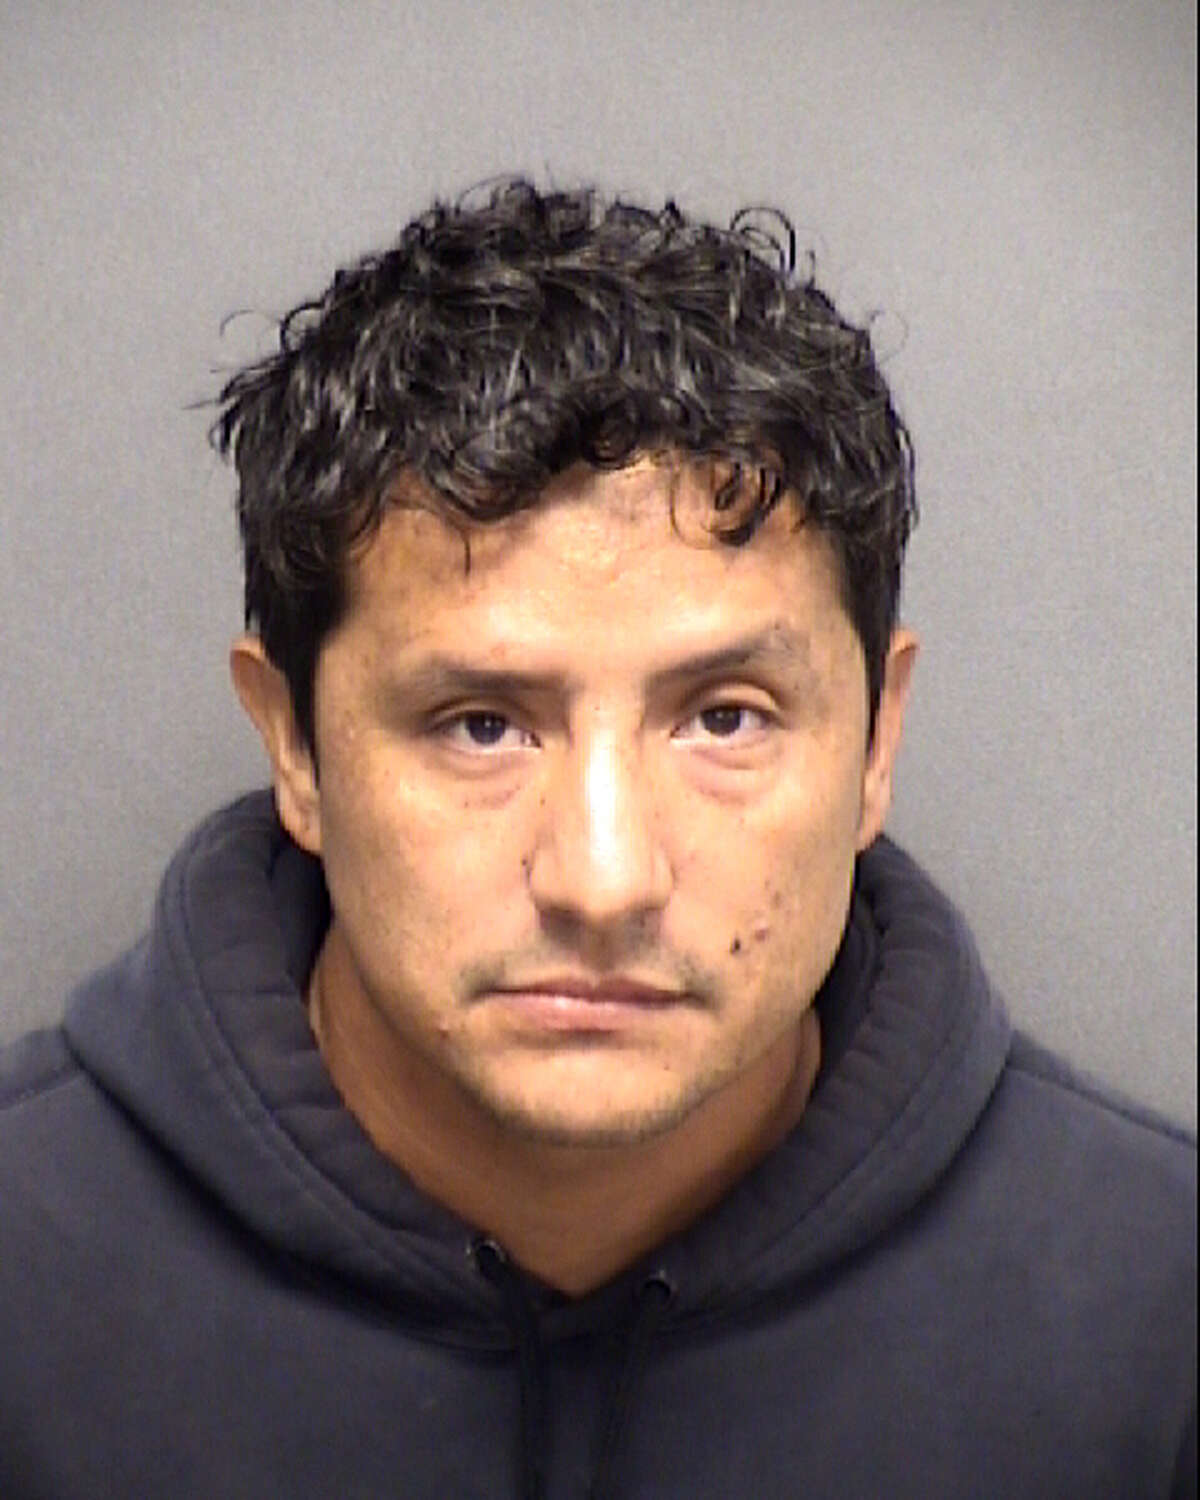 Antonio Gomez Jr. was indicted with sexual assault of a child on August 6, 2019.